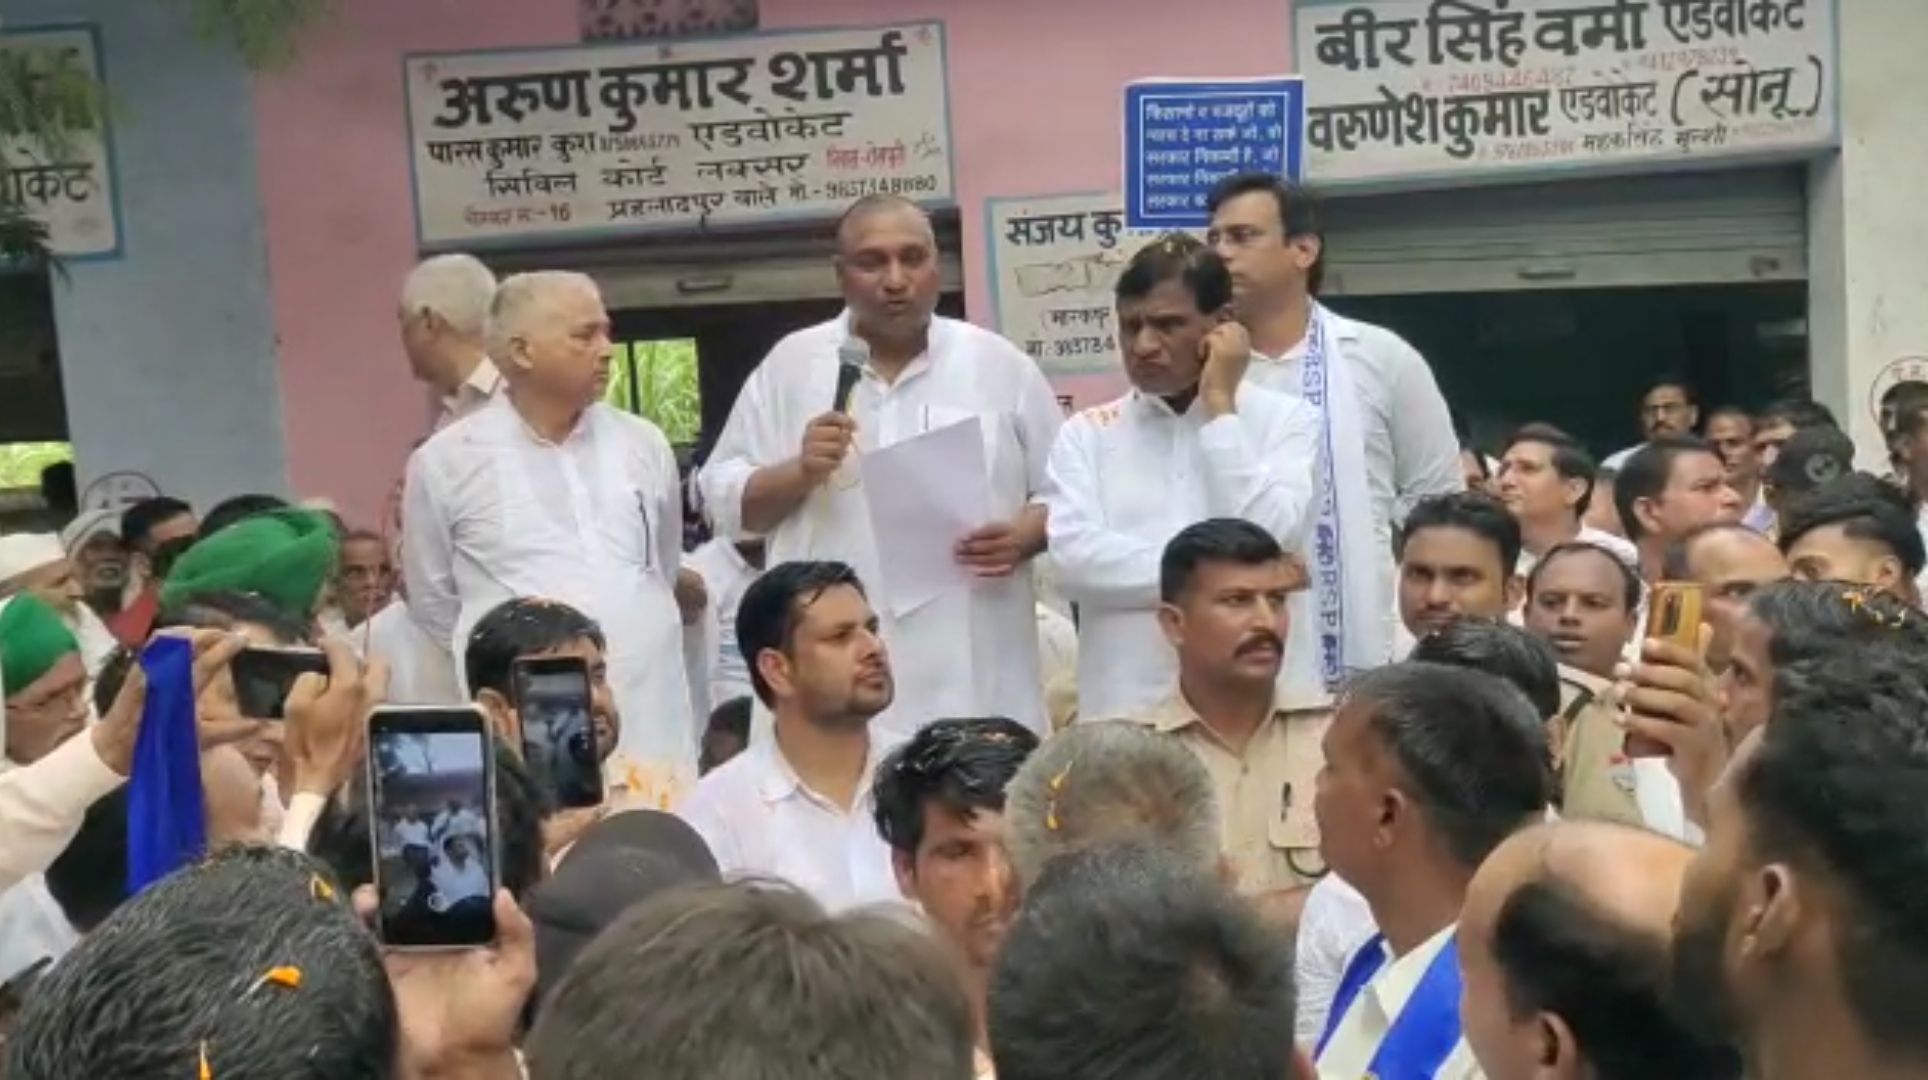 Laksar MLA Mohammad Shahzad Took Out Rally